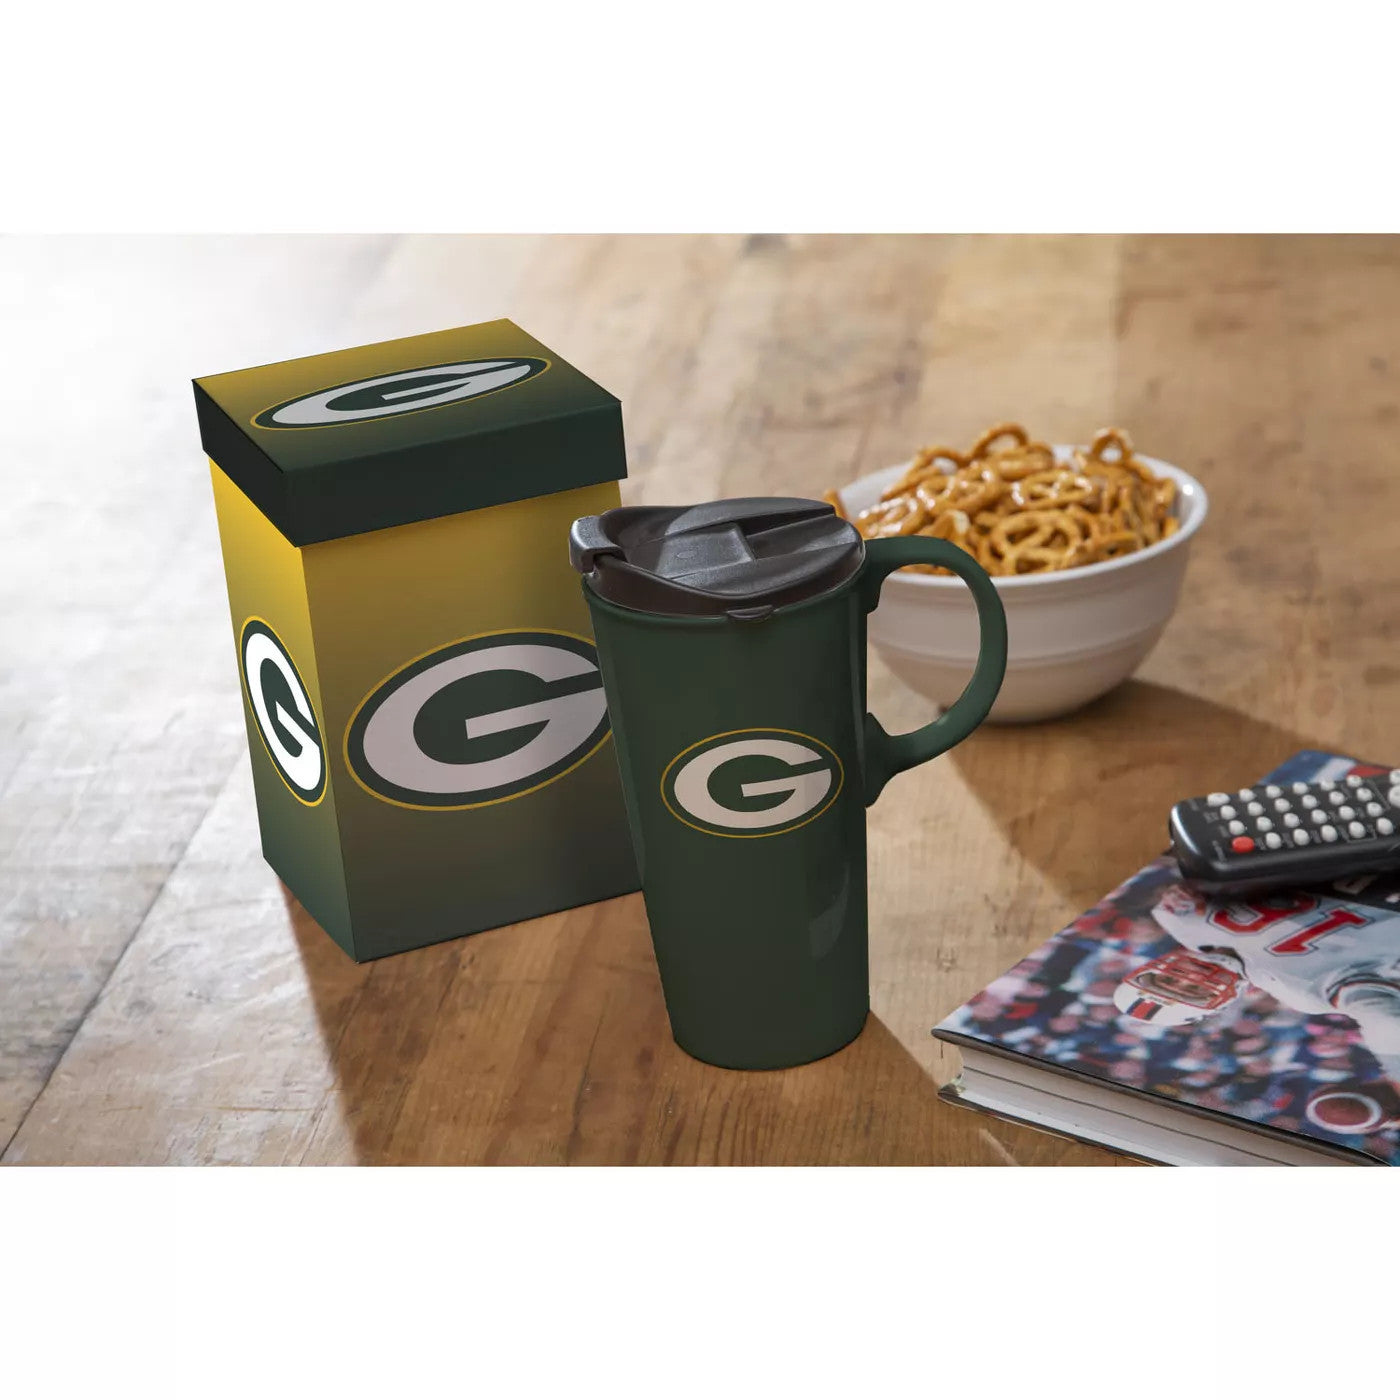 Evergreen Pittsburgh Steelers, 17oz Boxed Travel Latte